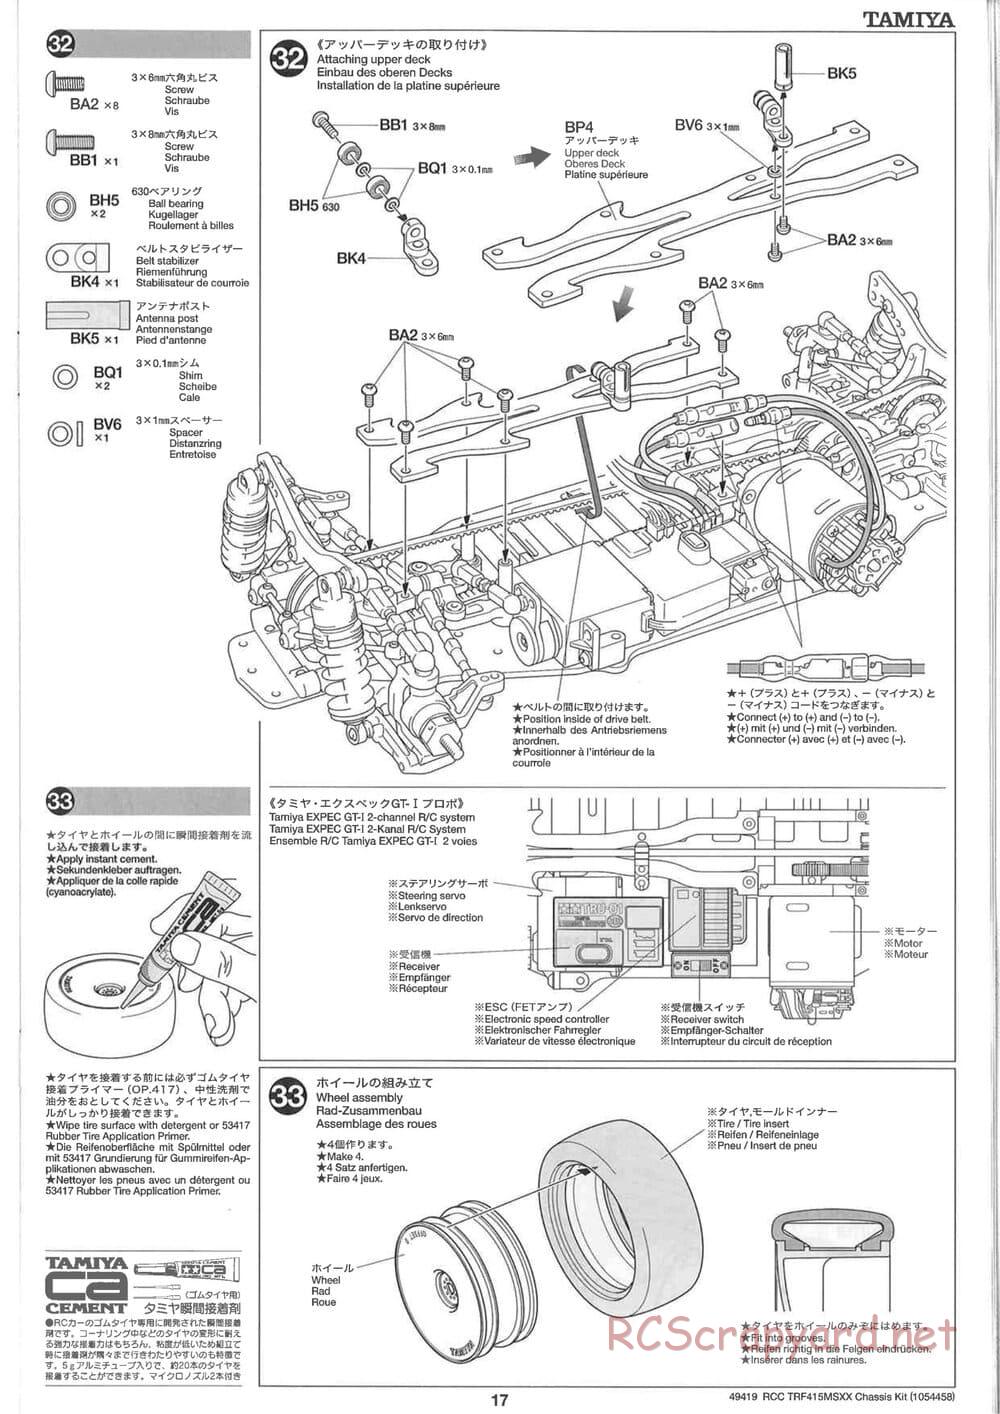 Tamiya - TRF415-MSXX Chassis - Manual - Page 17